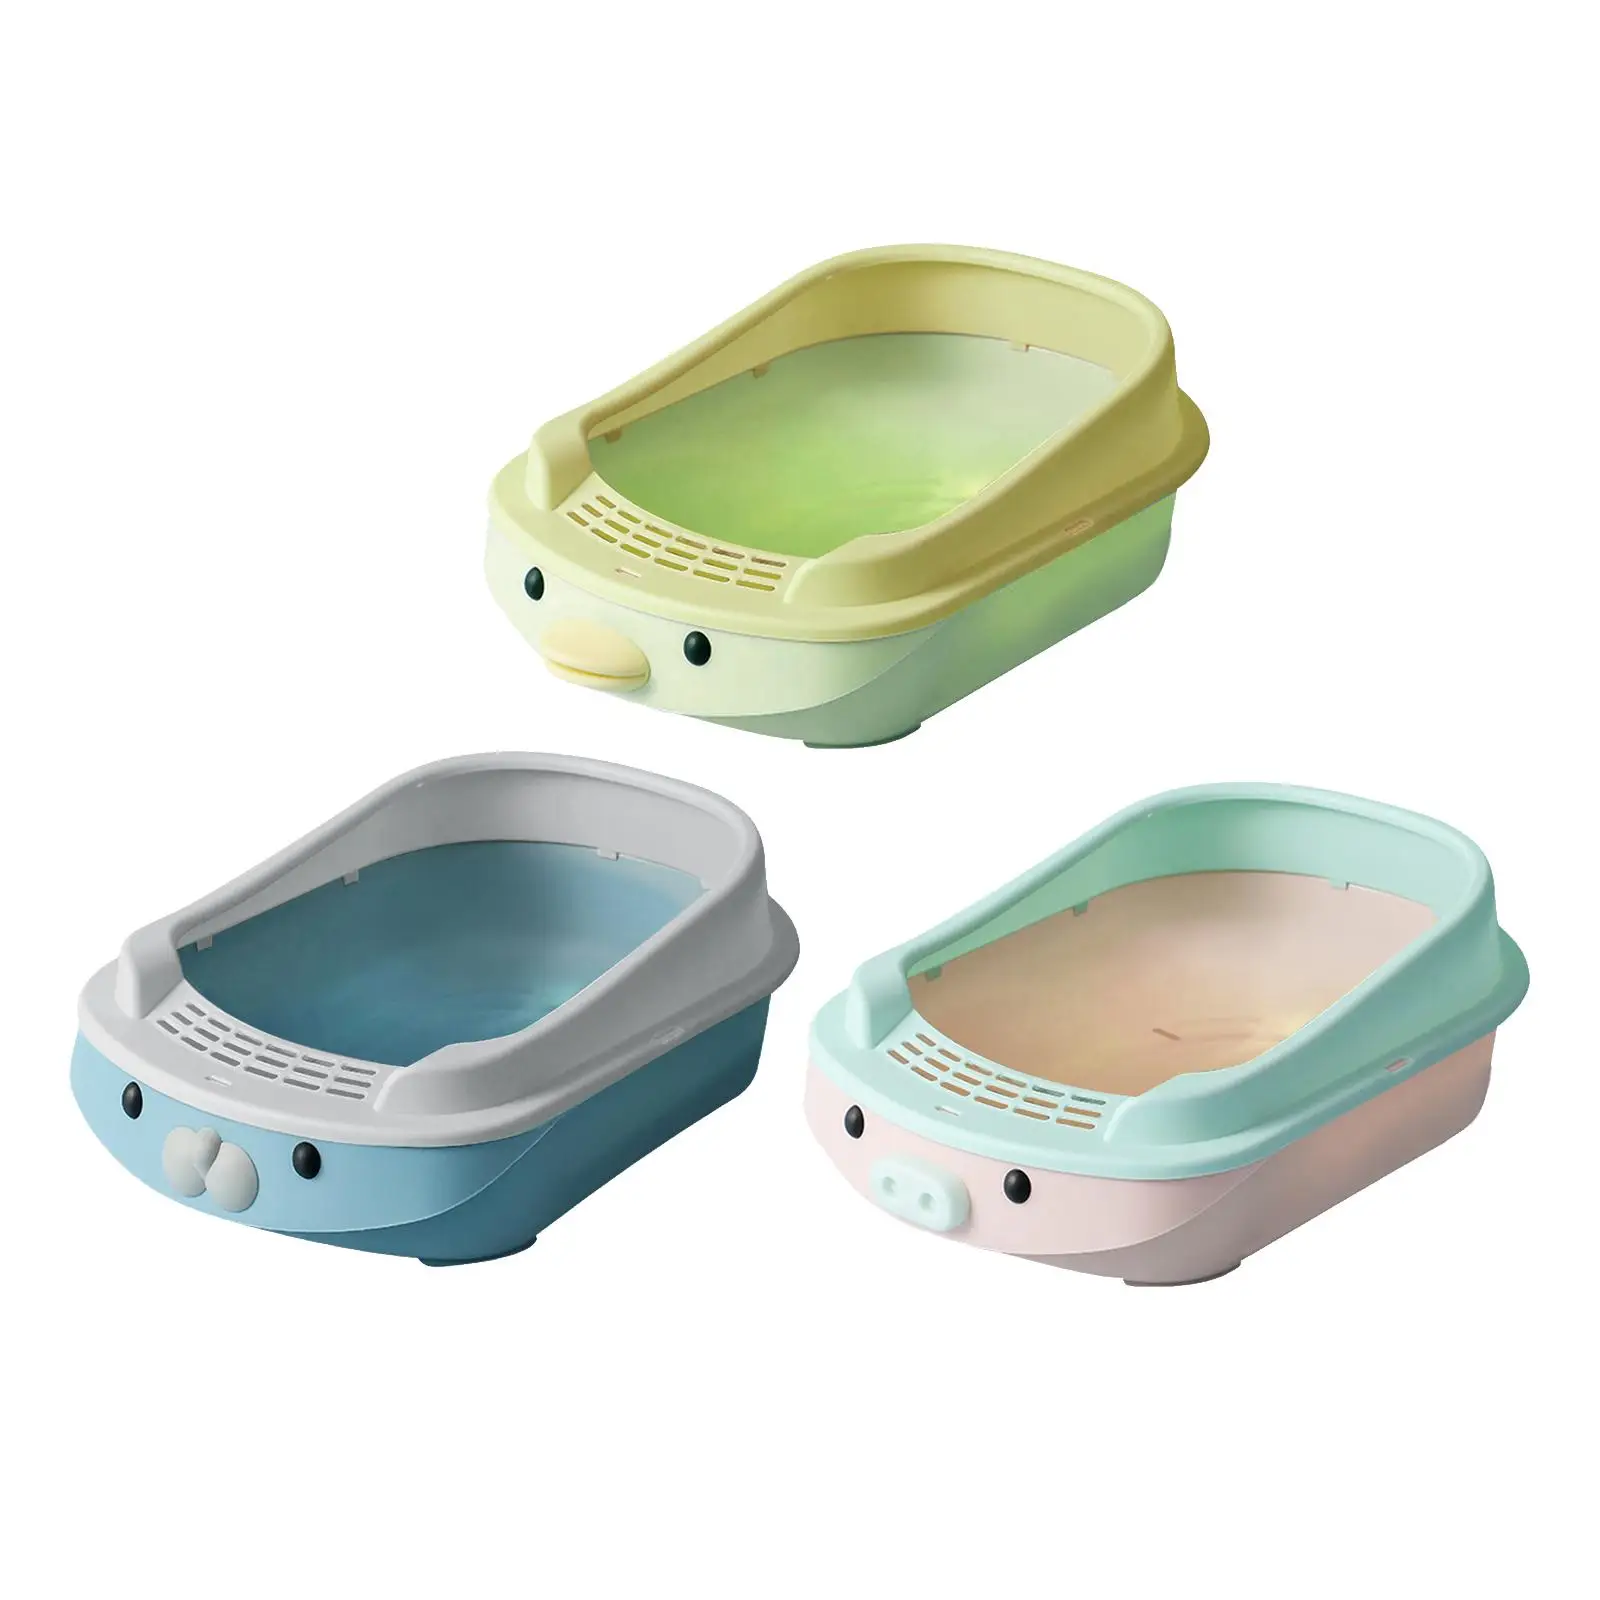 Semi Enclosed Litter Pan Sturdy Cat Bedpan Cats Litter Pan Kitten Potty Toilet for Kittens to Senior Cats Dogs Small Pets Kitty